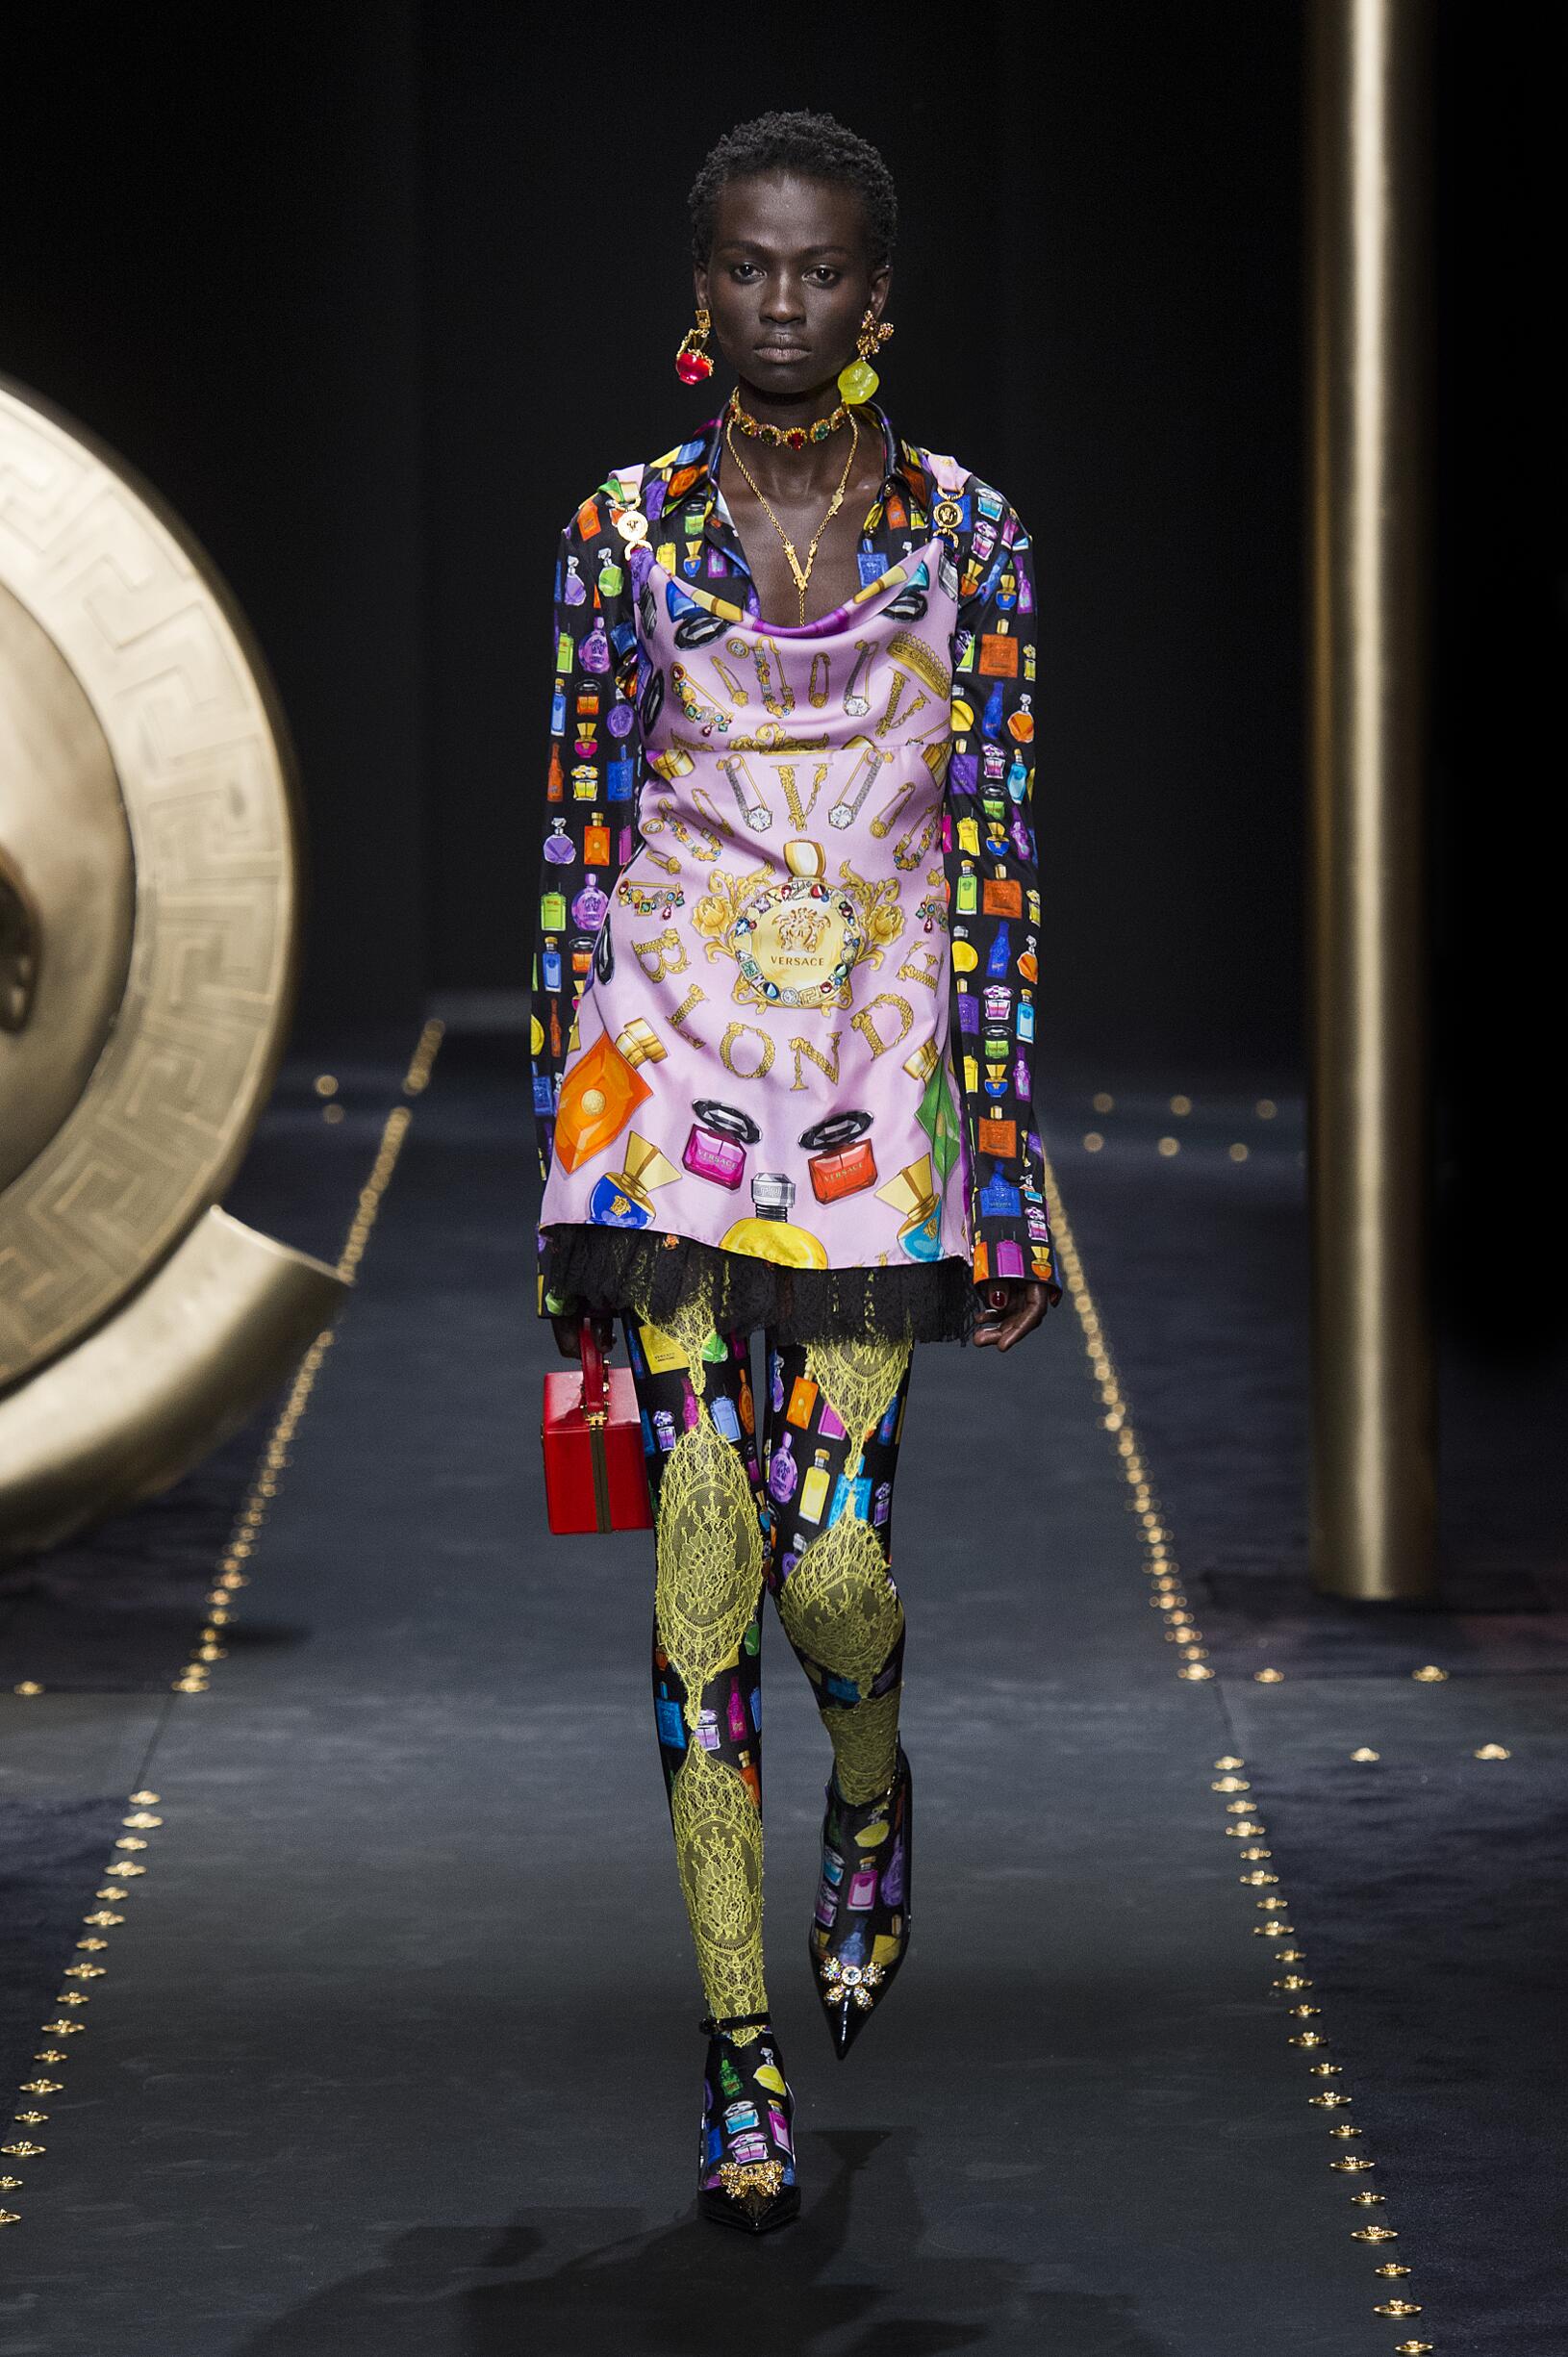 VERSACE FALL WINTER 2019 WOMEN'S COLLECTION | The Skinny Beep